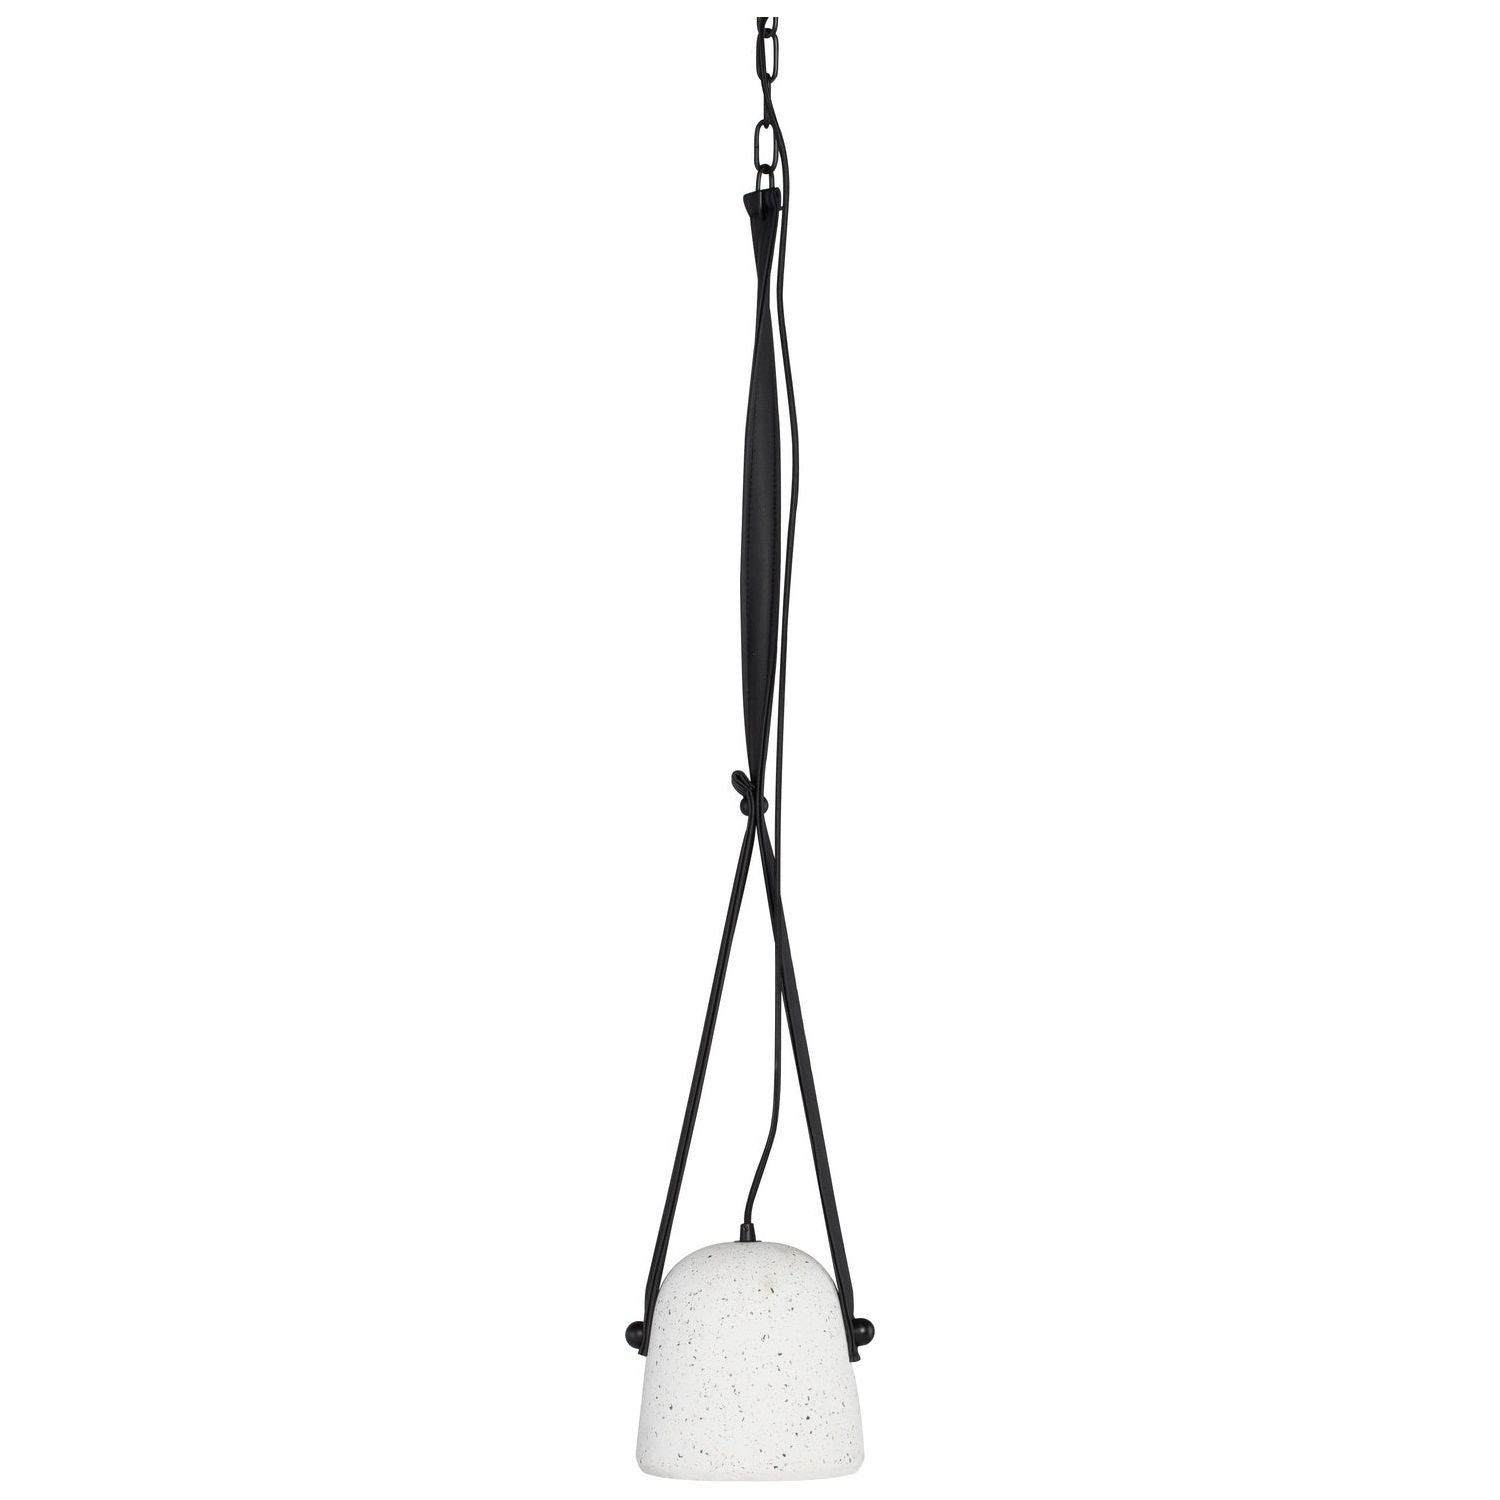 Nuevo Living - HGSK406 - LED Pendant - Anora - Speckle